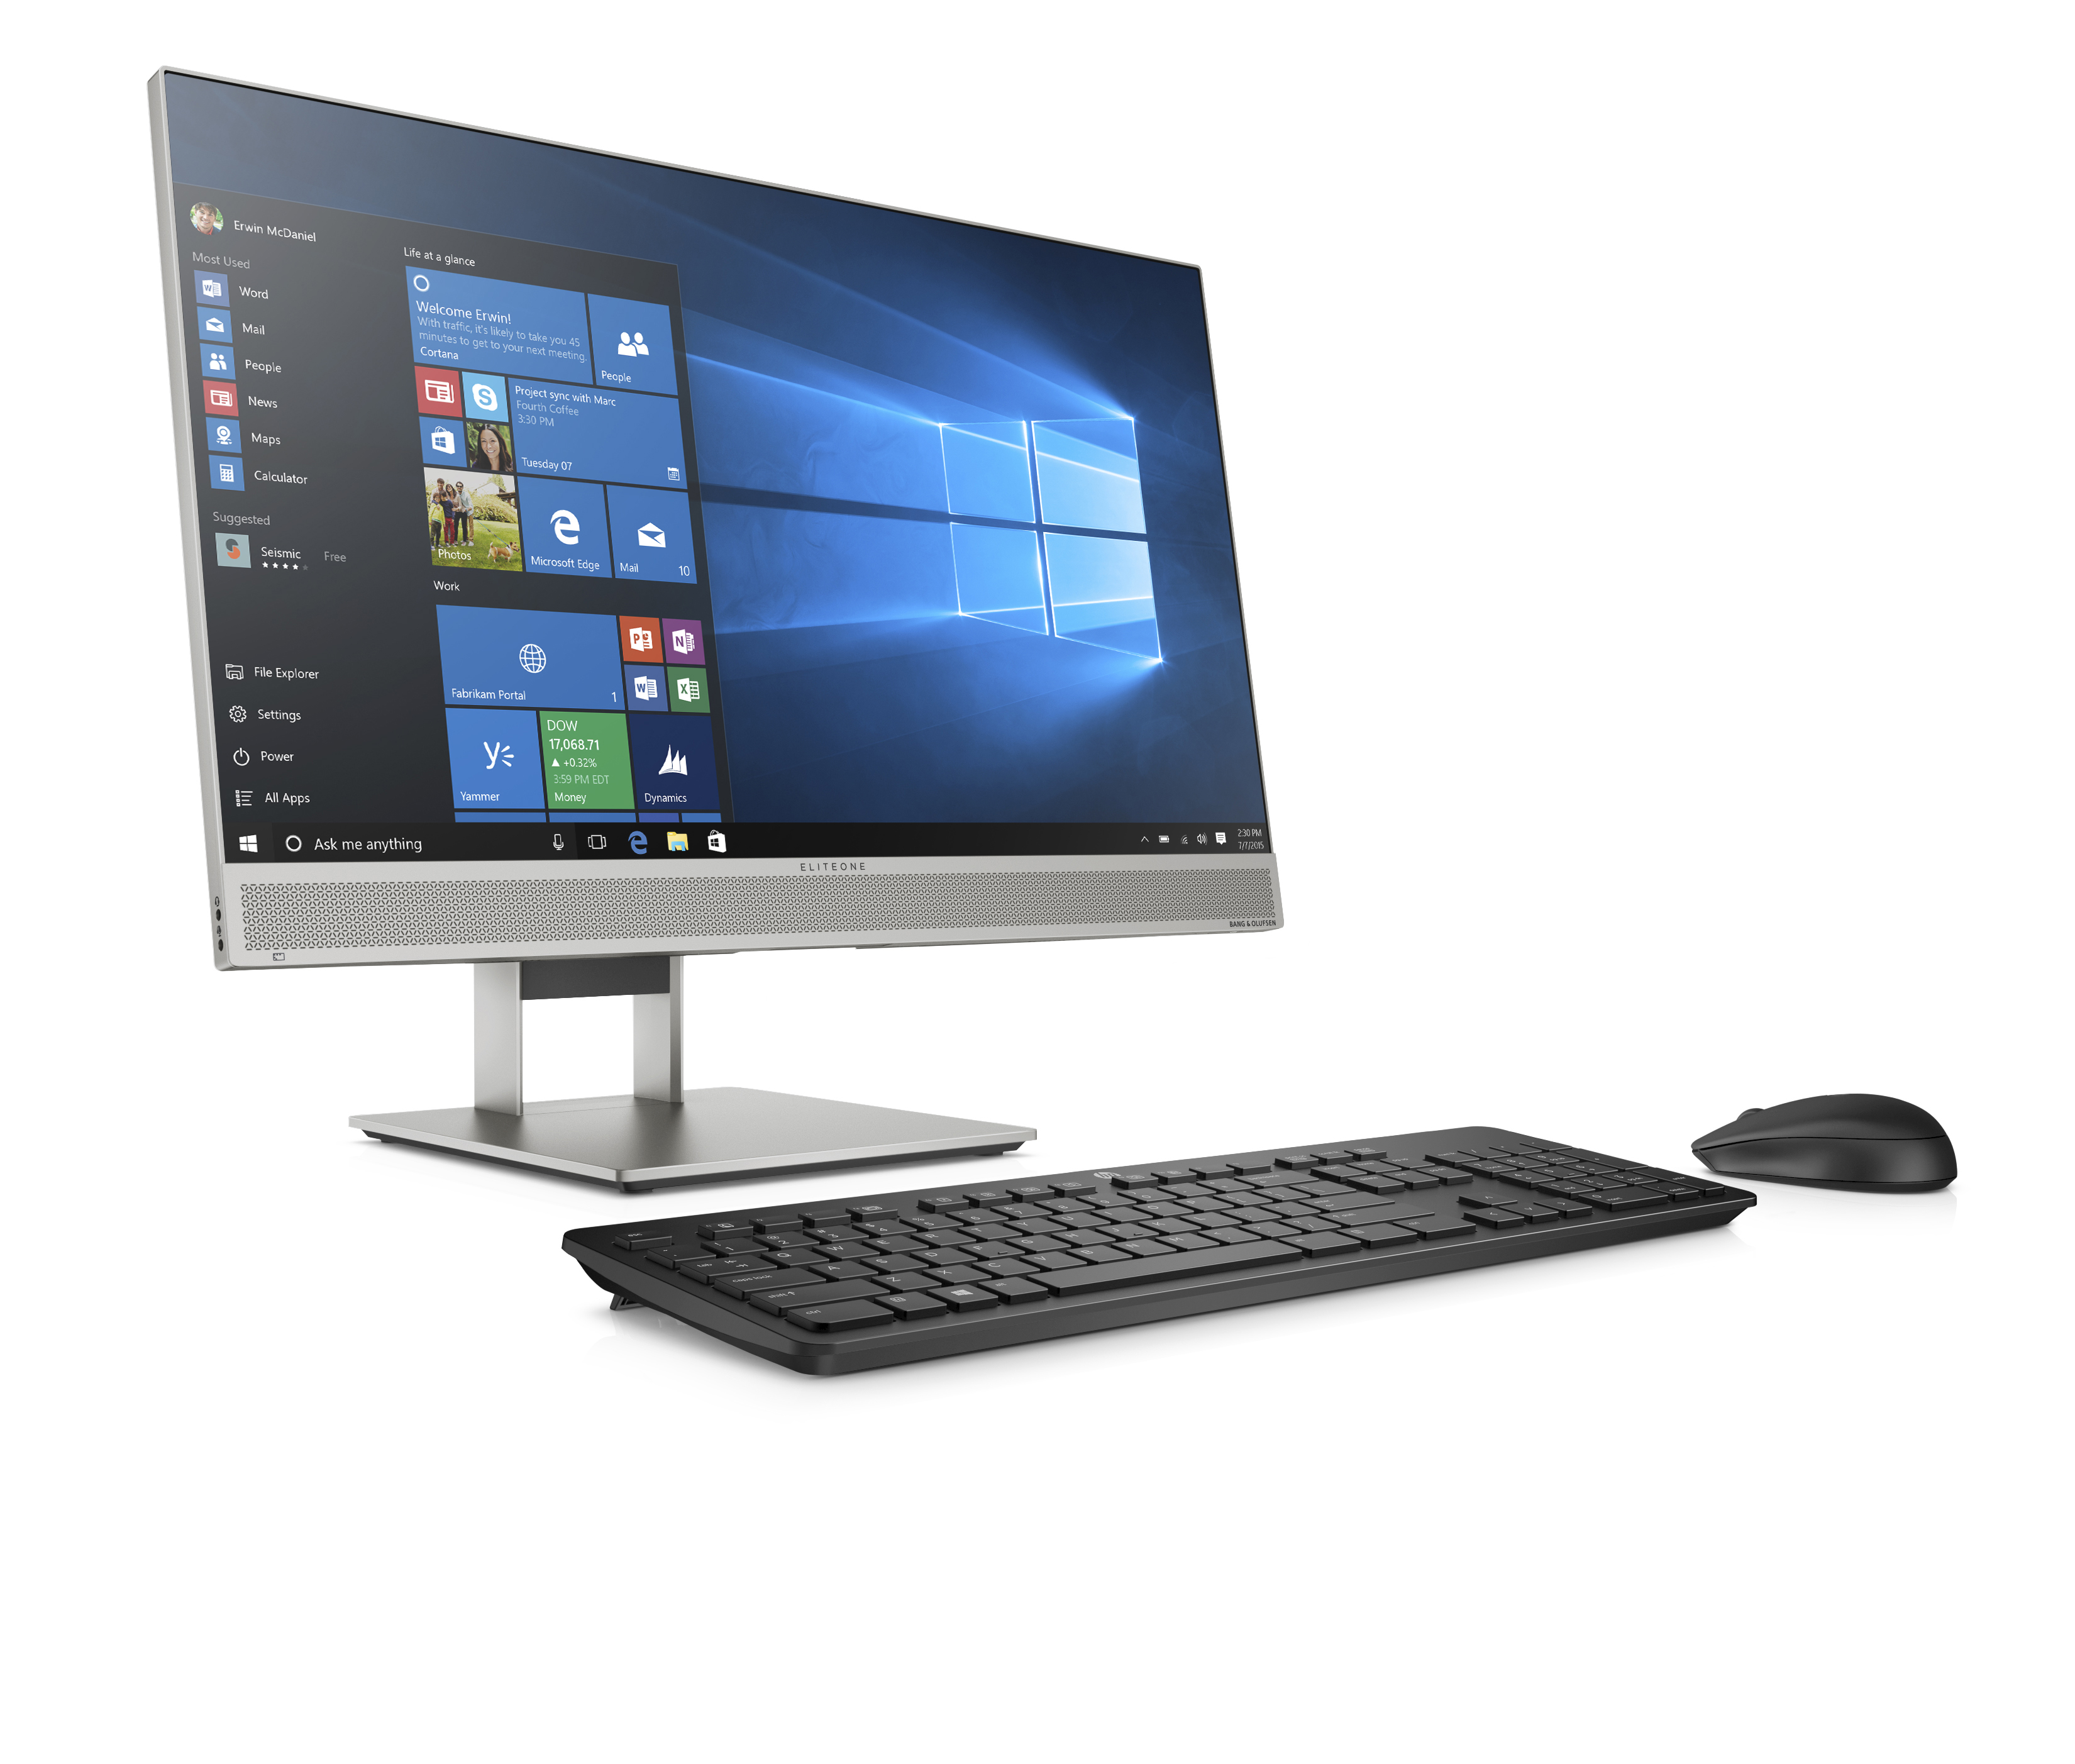 hp launches new monitors and all in one ces 2019 eliteone 800 g5 aio front right